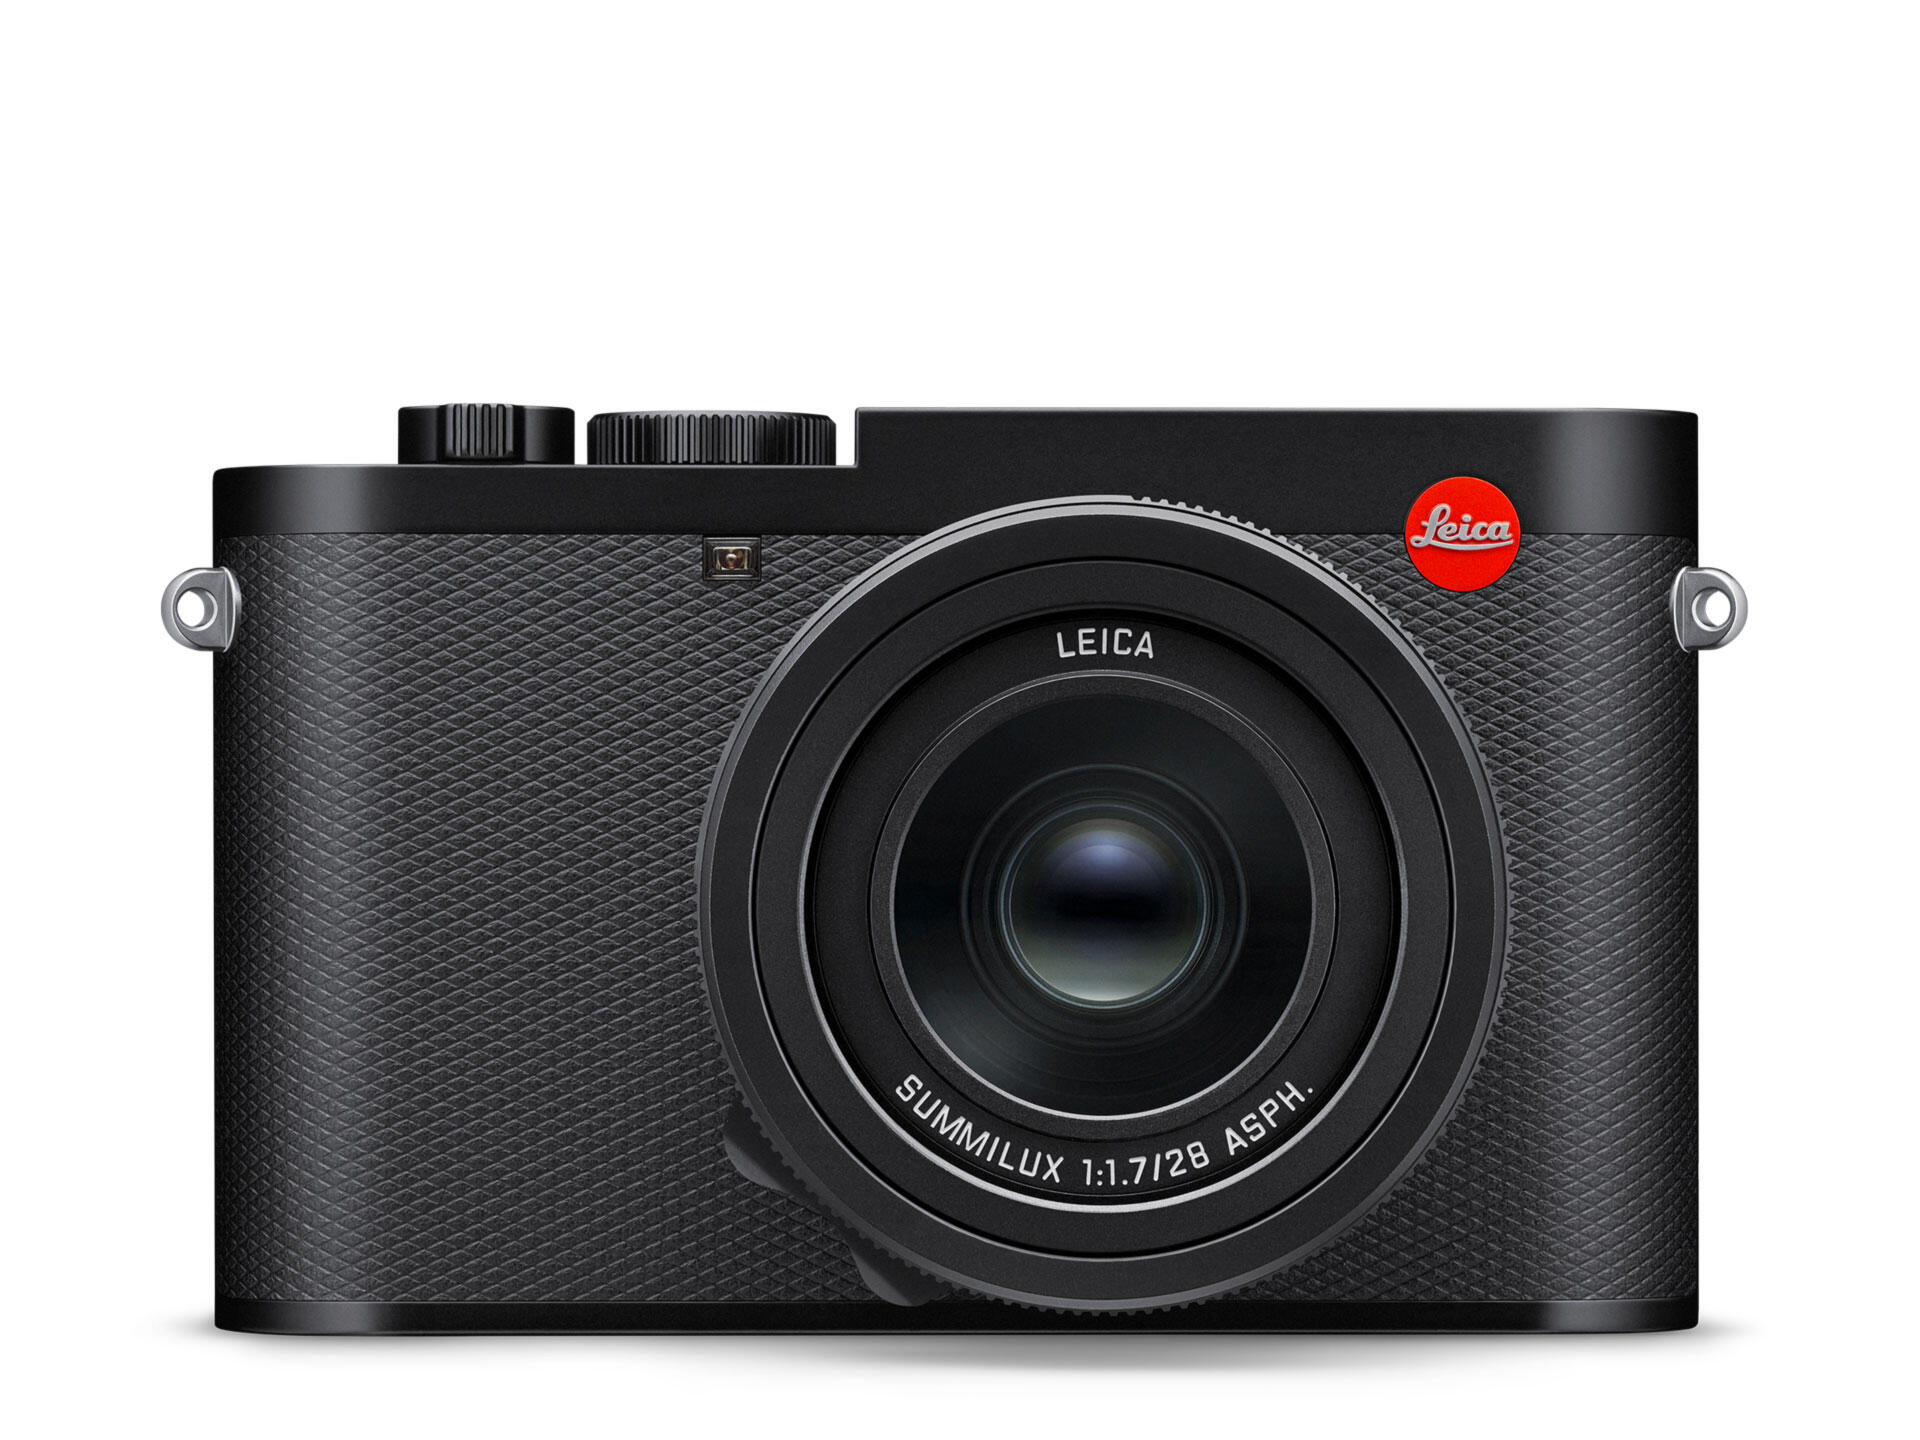 Leica Boutique: An affluence of accessories for the new Q3